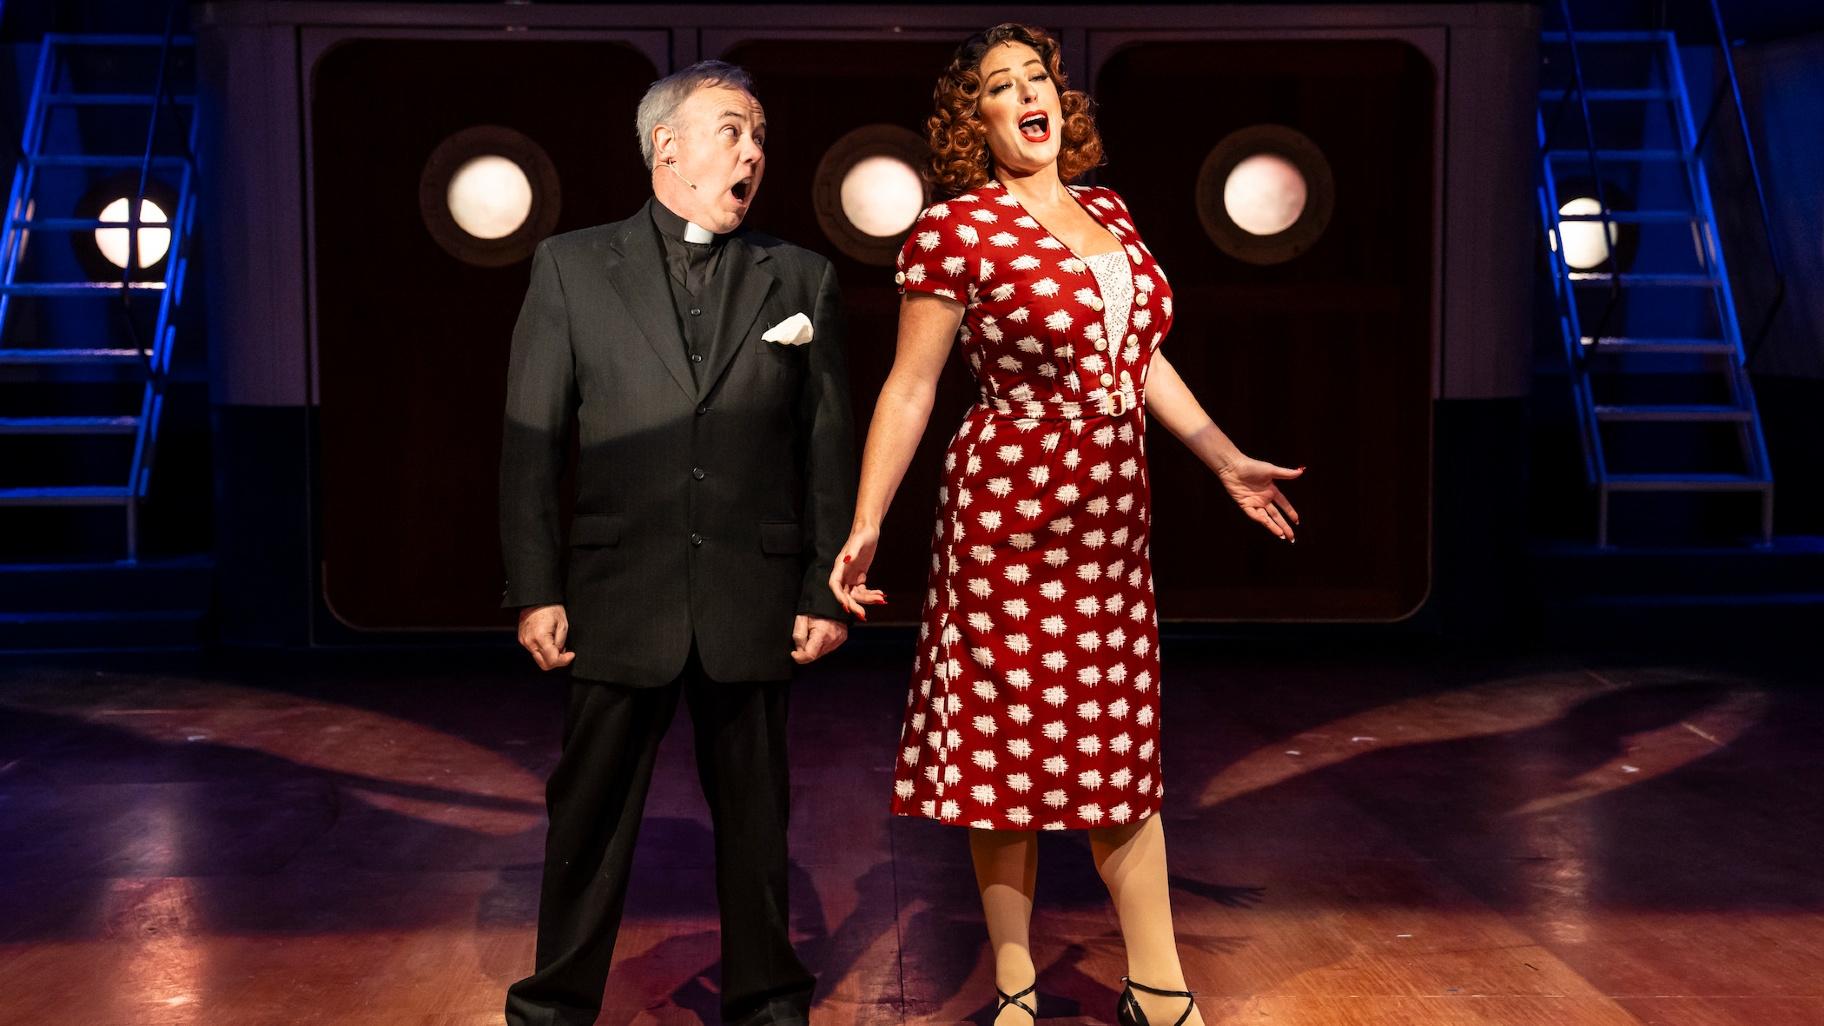 (L to R) Steve McDonagh and Meghan Murphy in “Anything Goes” from Porchlight Music Theatre, now playing through Feb. 25 at the Ruth Page Center for the Arts. (Liz Lauren)